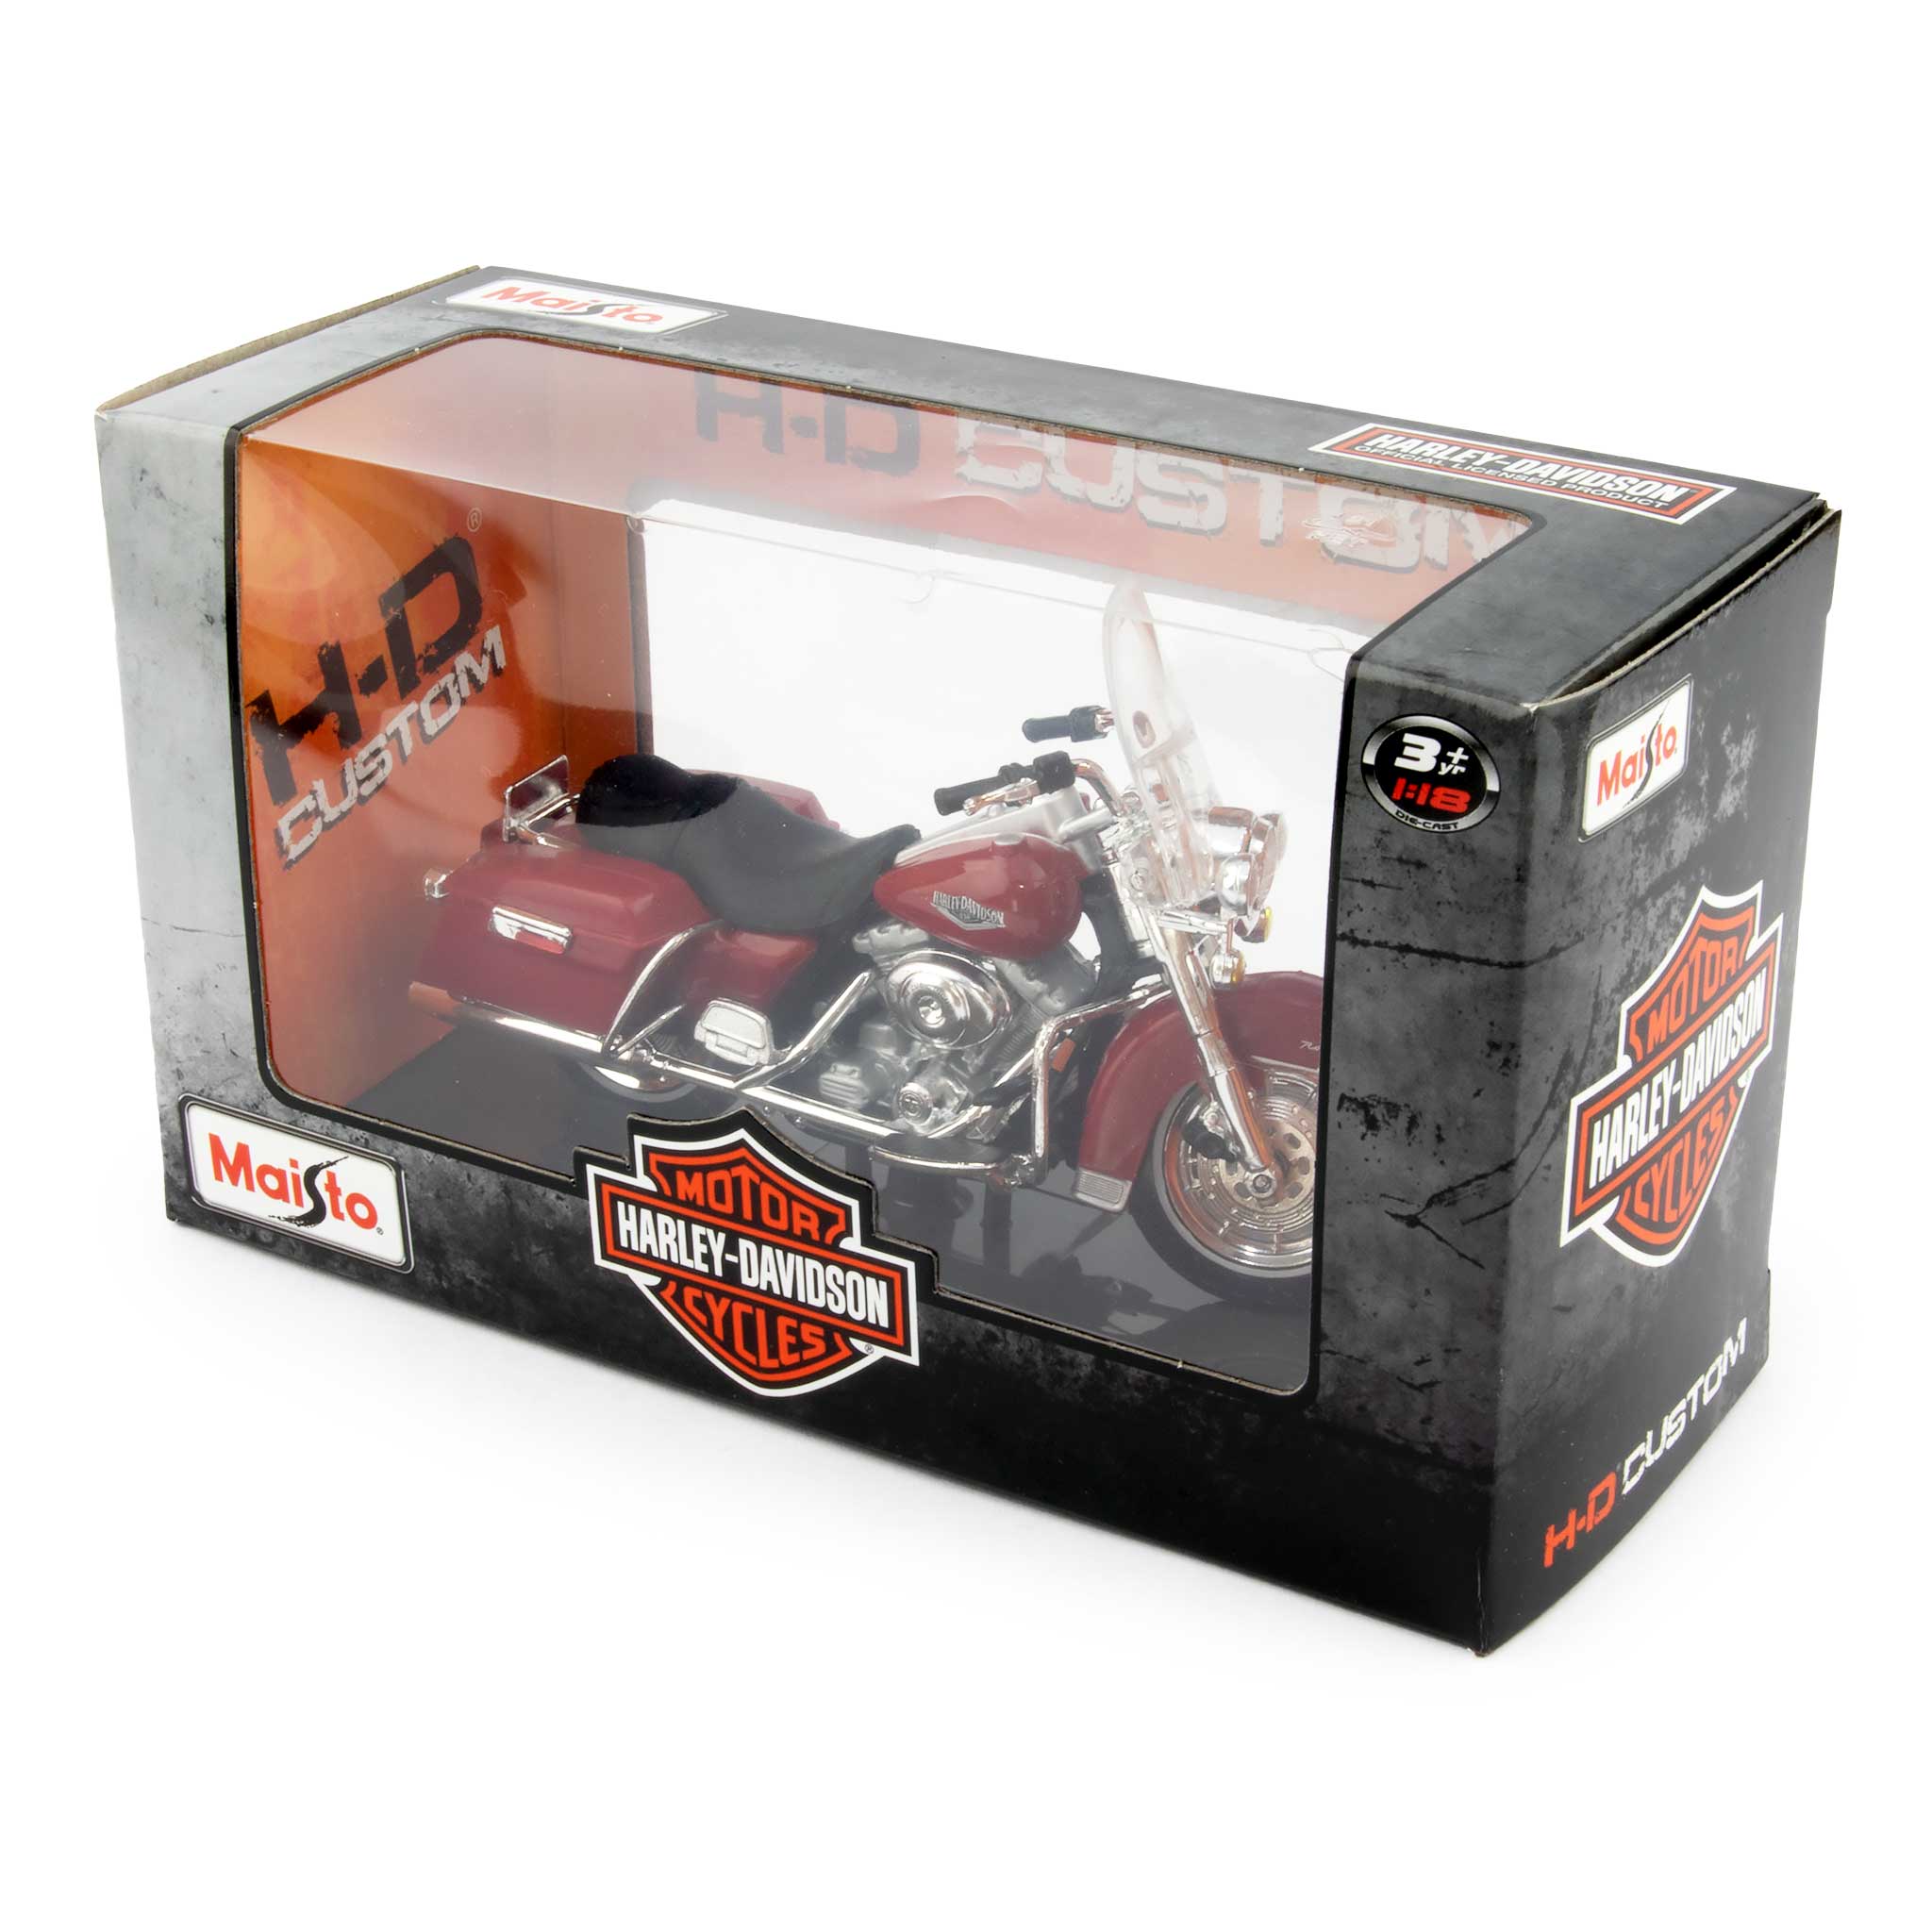 Harley-Davidson FLHR Road King Diecast Model Motorcycle 1999 red - 1:18 scale-Maisto-Diecast Model Centre